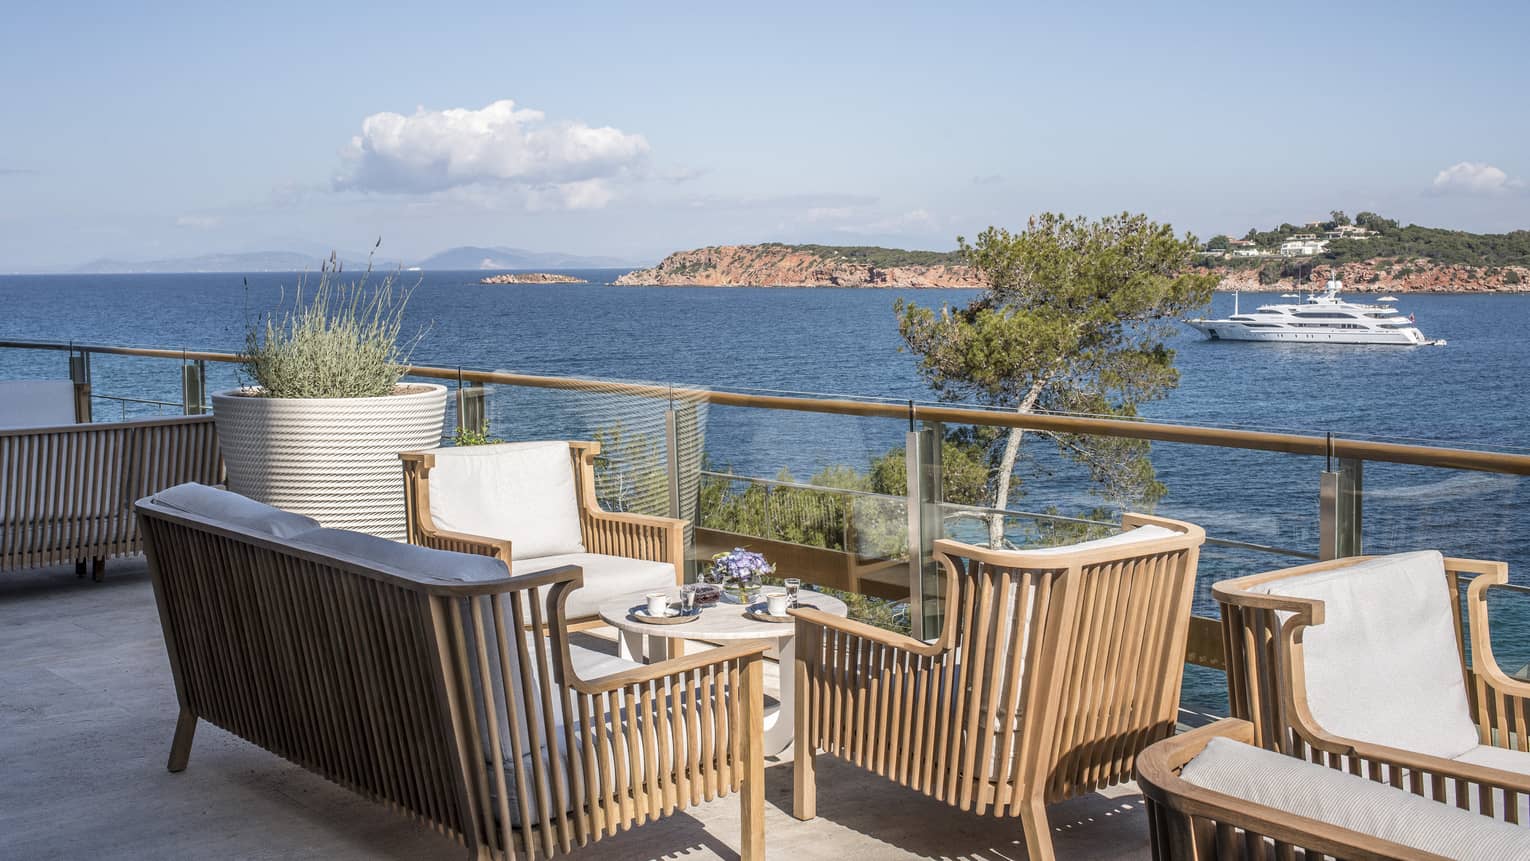 Wooden chairs with white cushions surrounding small round table by ocean with boat at Astron Terrace